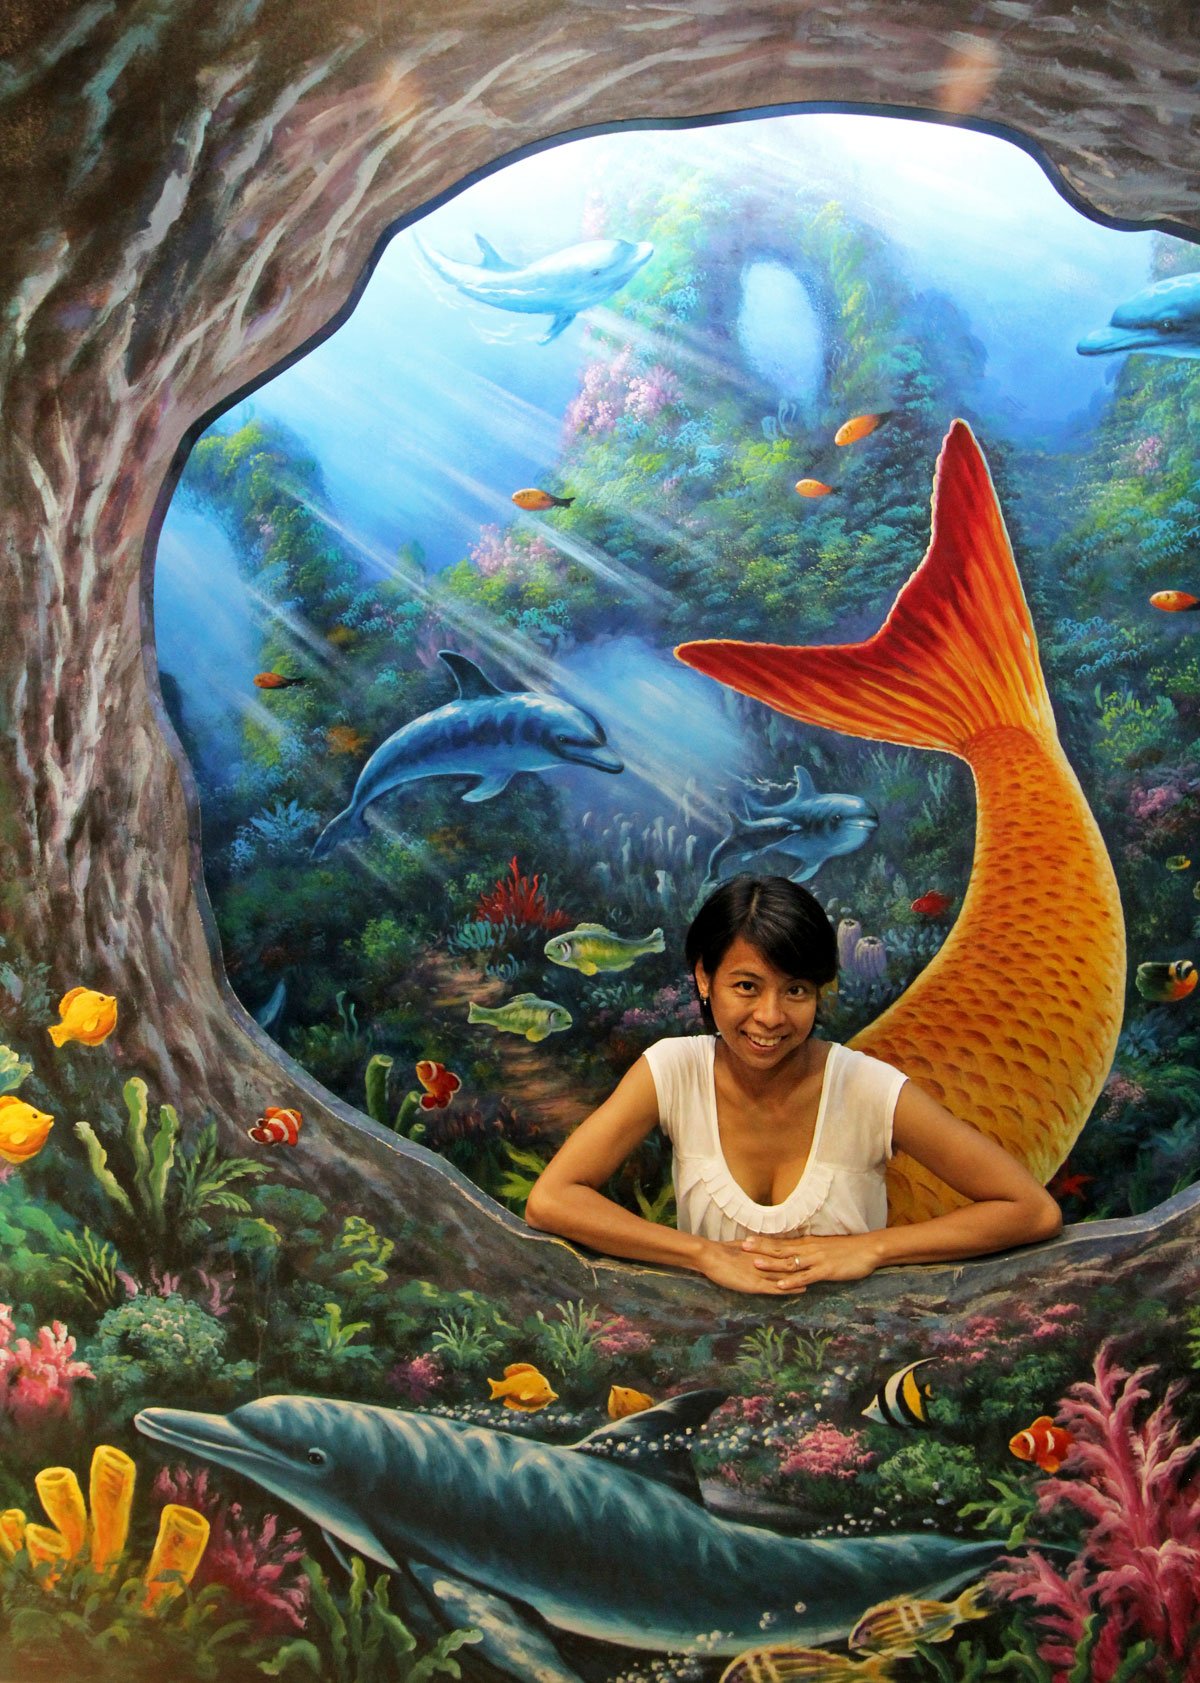 Art Comes to Life at the Trick Eye Museum at Resorts World Sentosa, Singapore